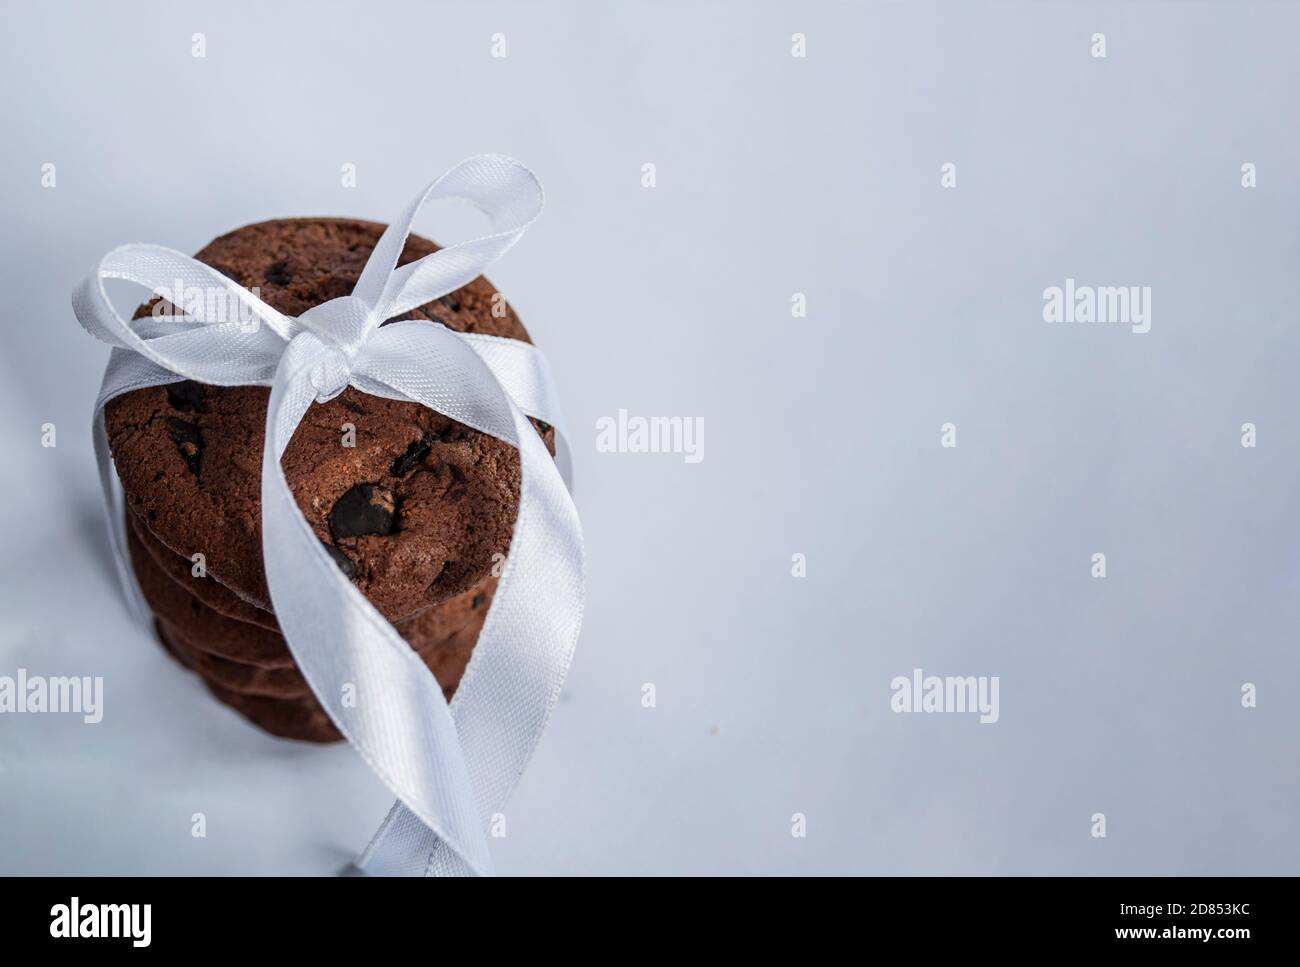 Stack of chocolate chip cookies with chocolate crumbs wrapped in white satin ribbon on a light background. Image with space for text. Selective focus Stock Photo